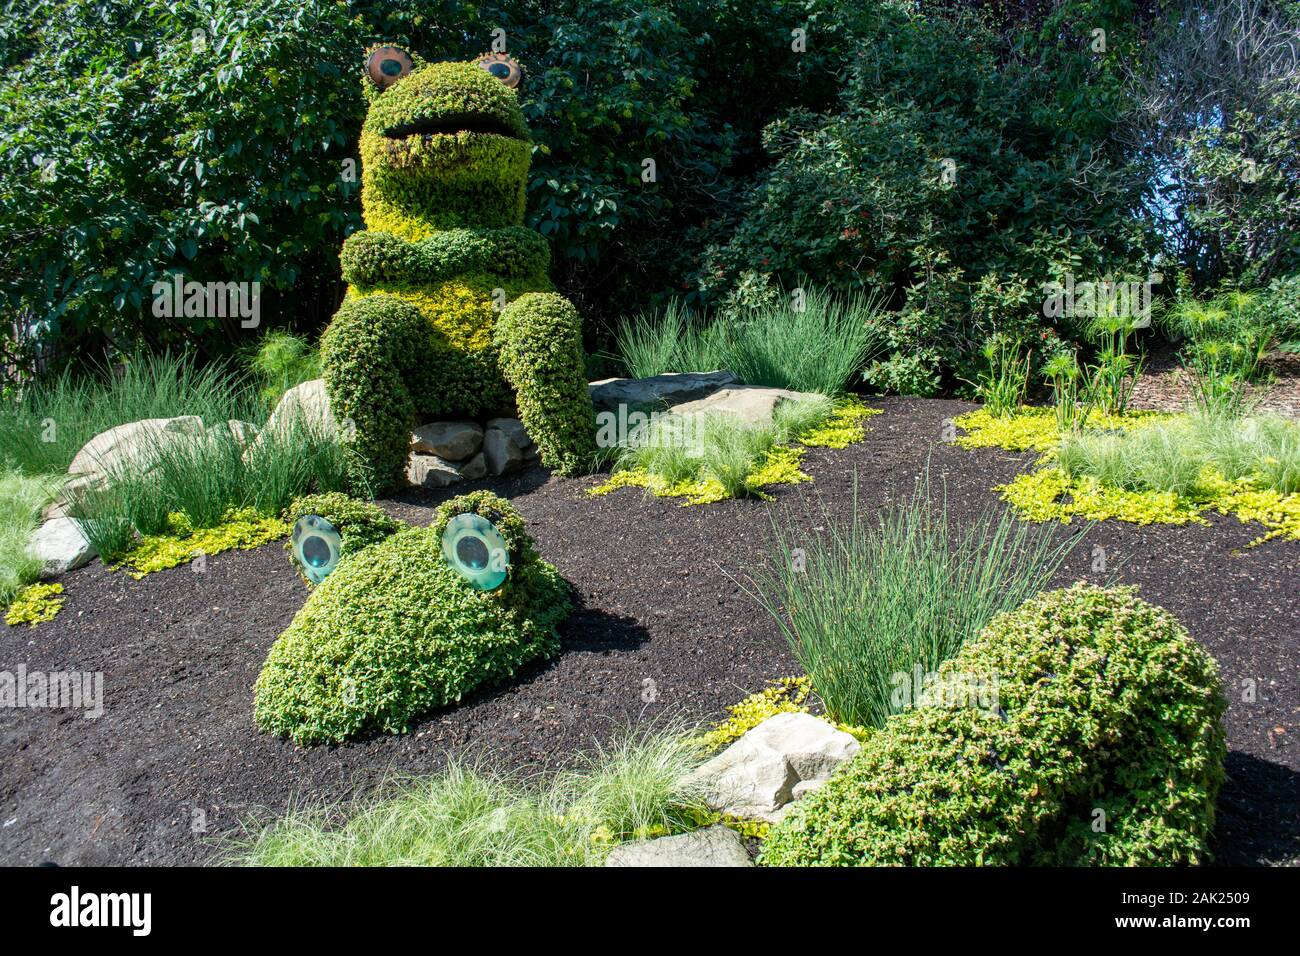 Frog shaped bushed in green landscaped gardens Stock Photo